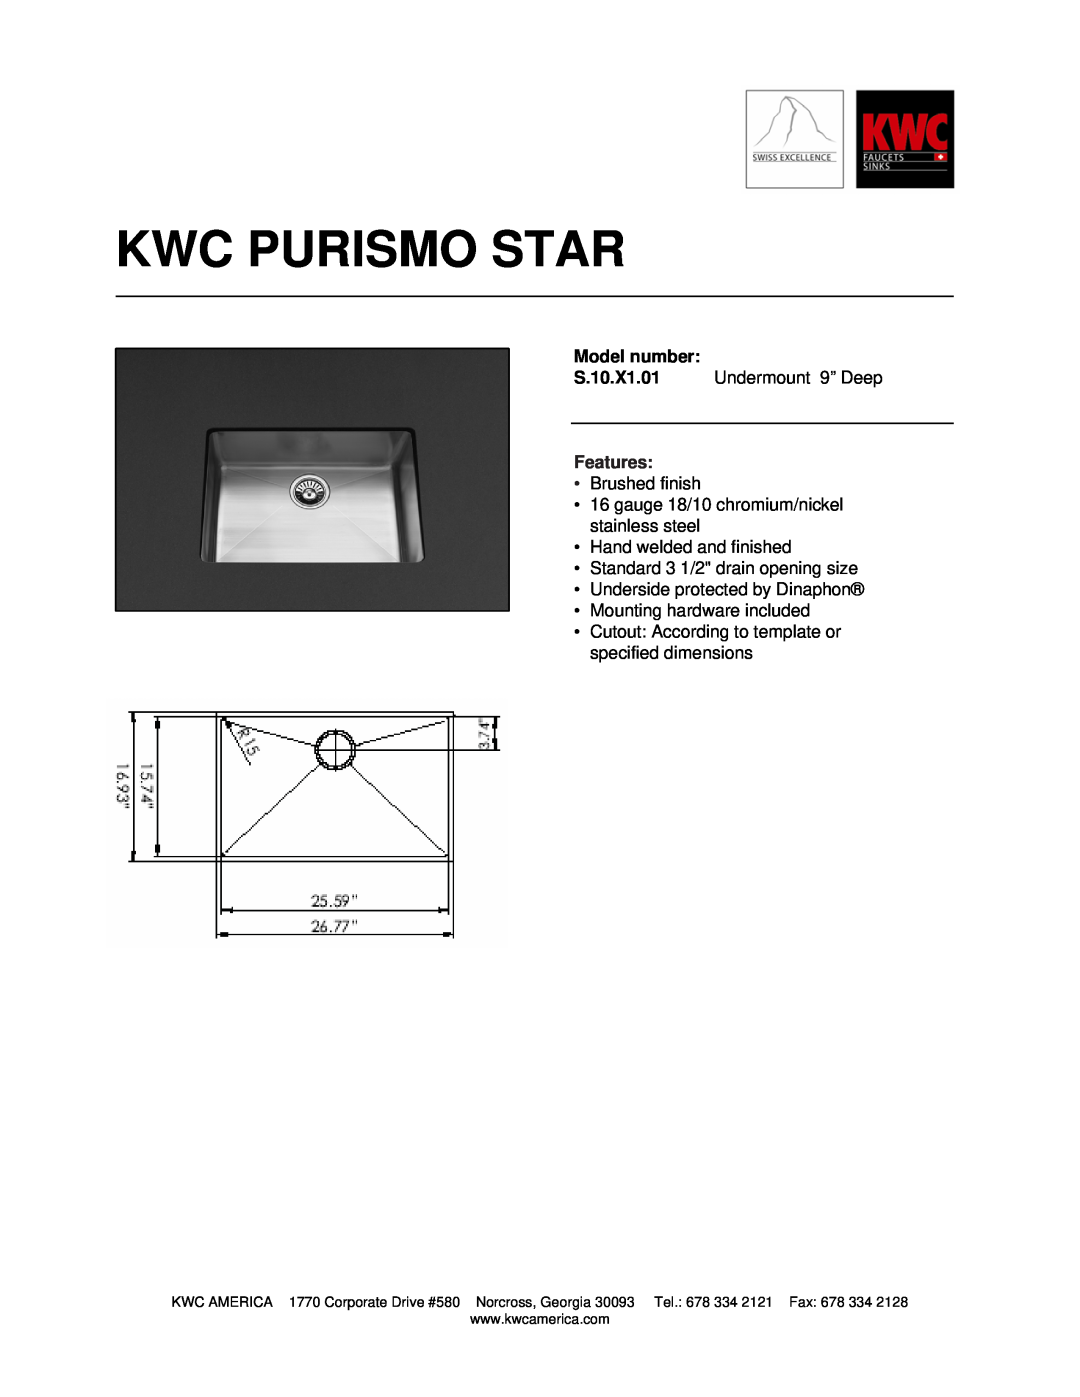 KWC S.10.X1.01 dimensions Kwc Purismo Star, Model number, Features 